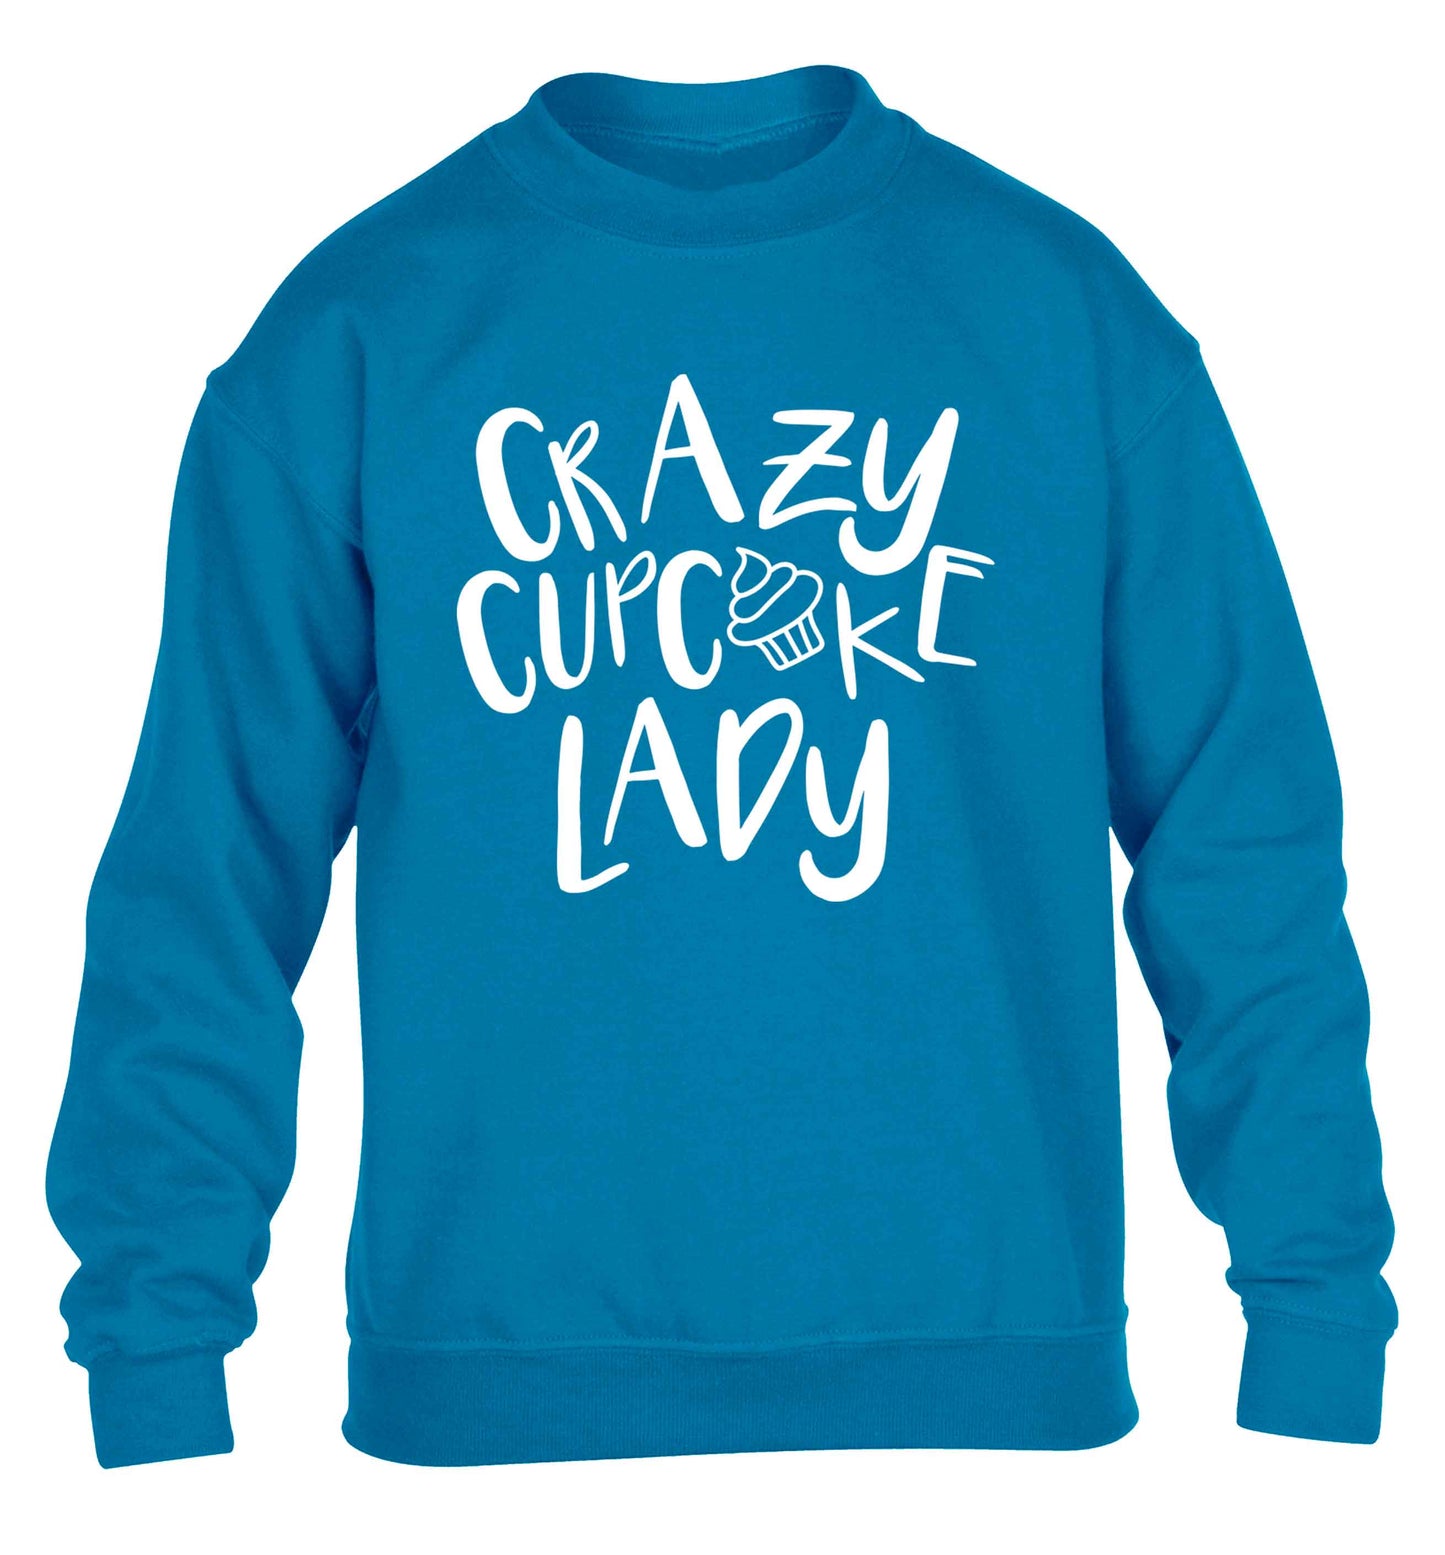 Crazy cupcake lady children's blue sweater 12-13 Years